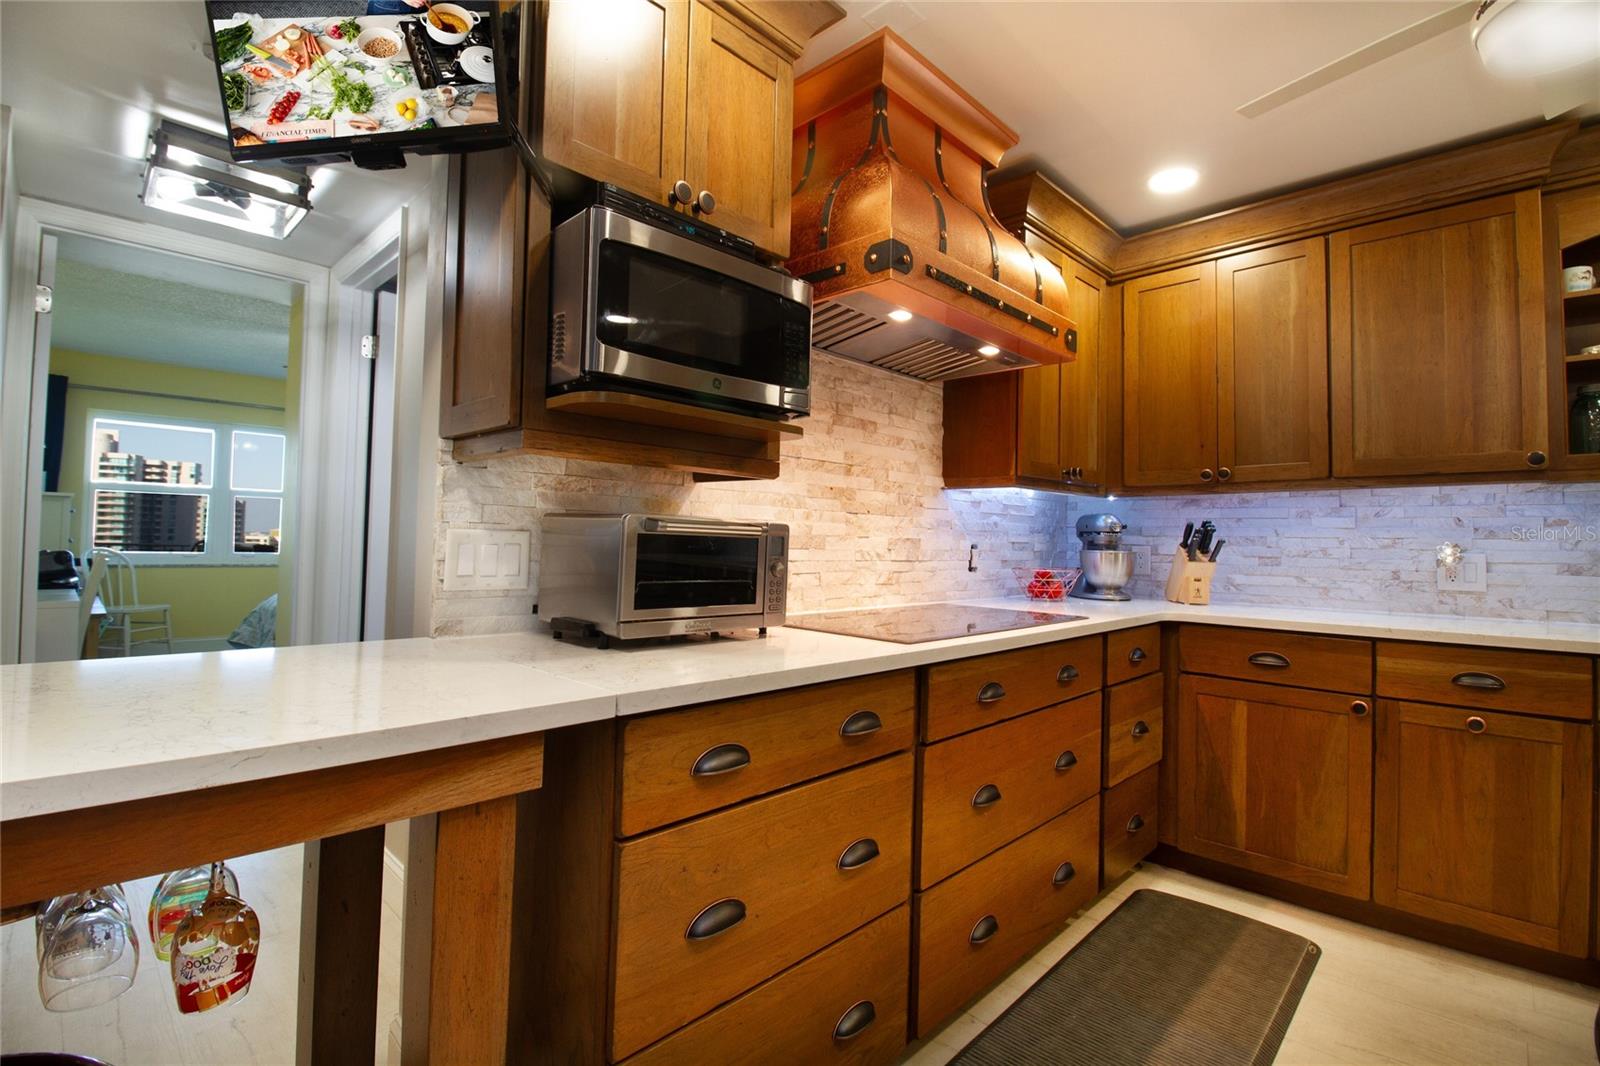 Gorgeous Cherry Cabinets with Quartz Countertops